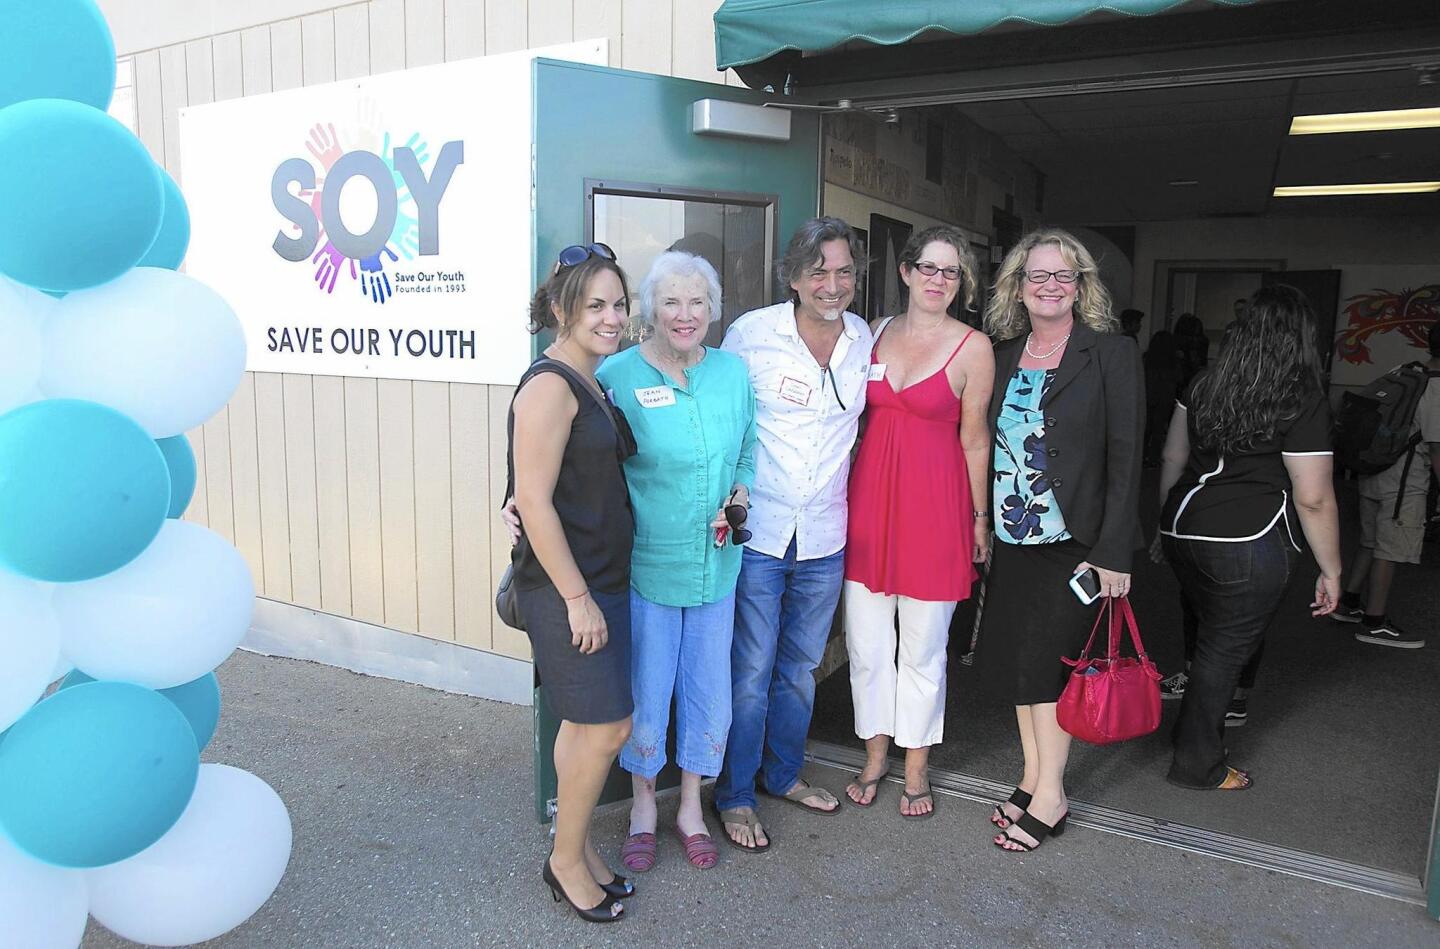 SOY board member Adriana Desmond, Jean Forbath, SOY board member Ivan Calderon, Susie Forbath, and Costa Mesa Councilwoman Katrina Foley gather during the grand opening of the new Save Our Youth center in Costa Mesa on Wednesday.